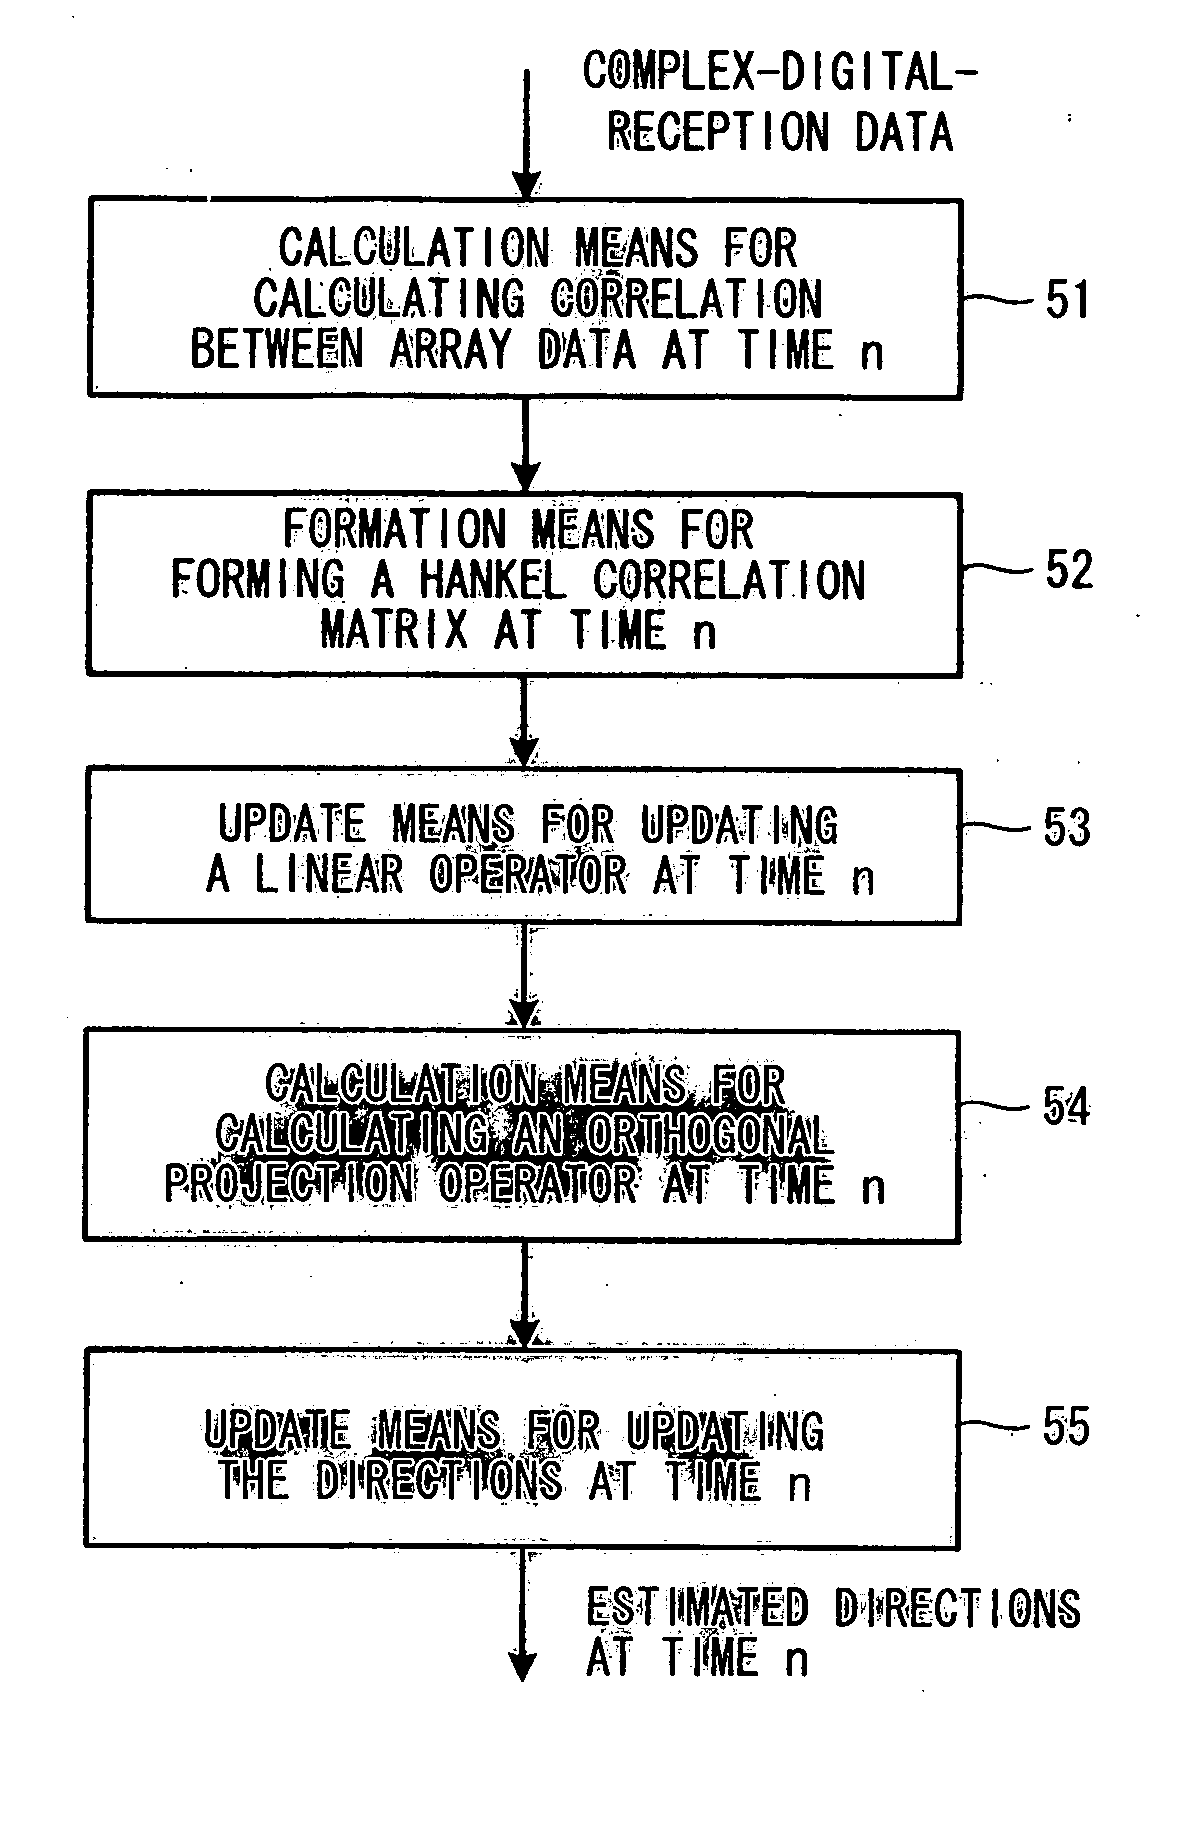 Method and apparatus for adaptive direction estimation of radio waves